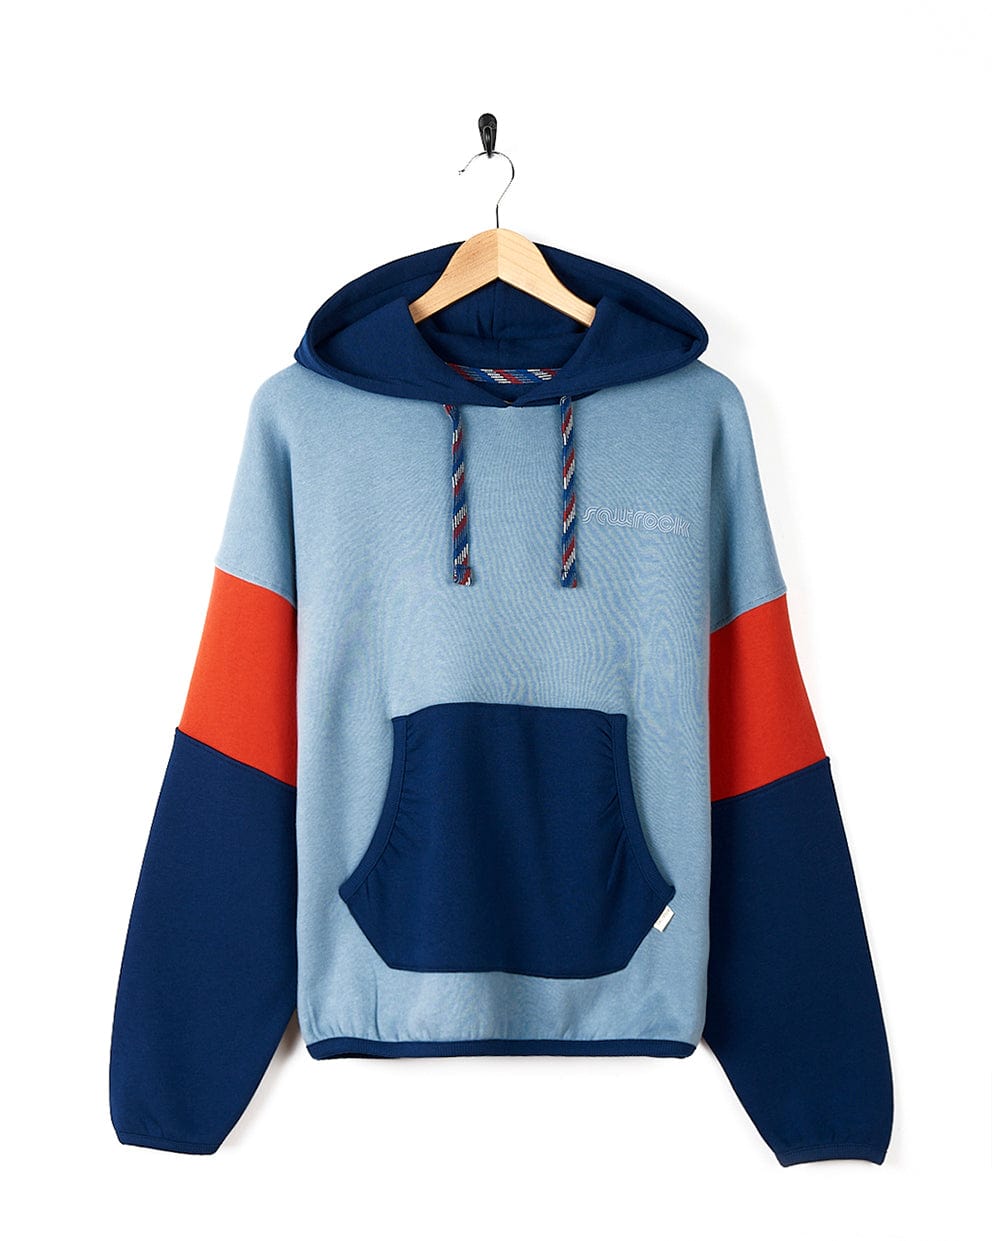 A relaxed fit blue and orange Saltrock hoodie with contrast paneling, featuring Saltrock branding, hanging on a hanger.